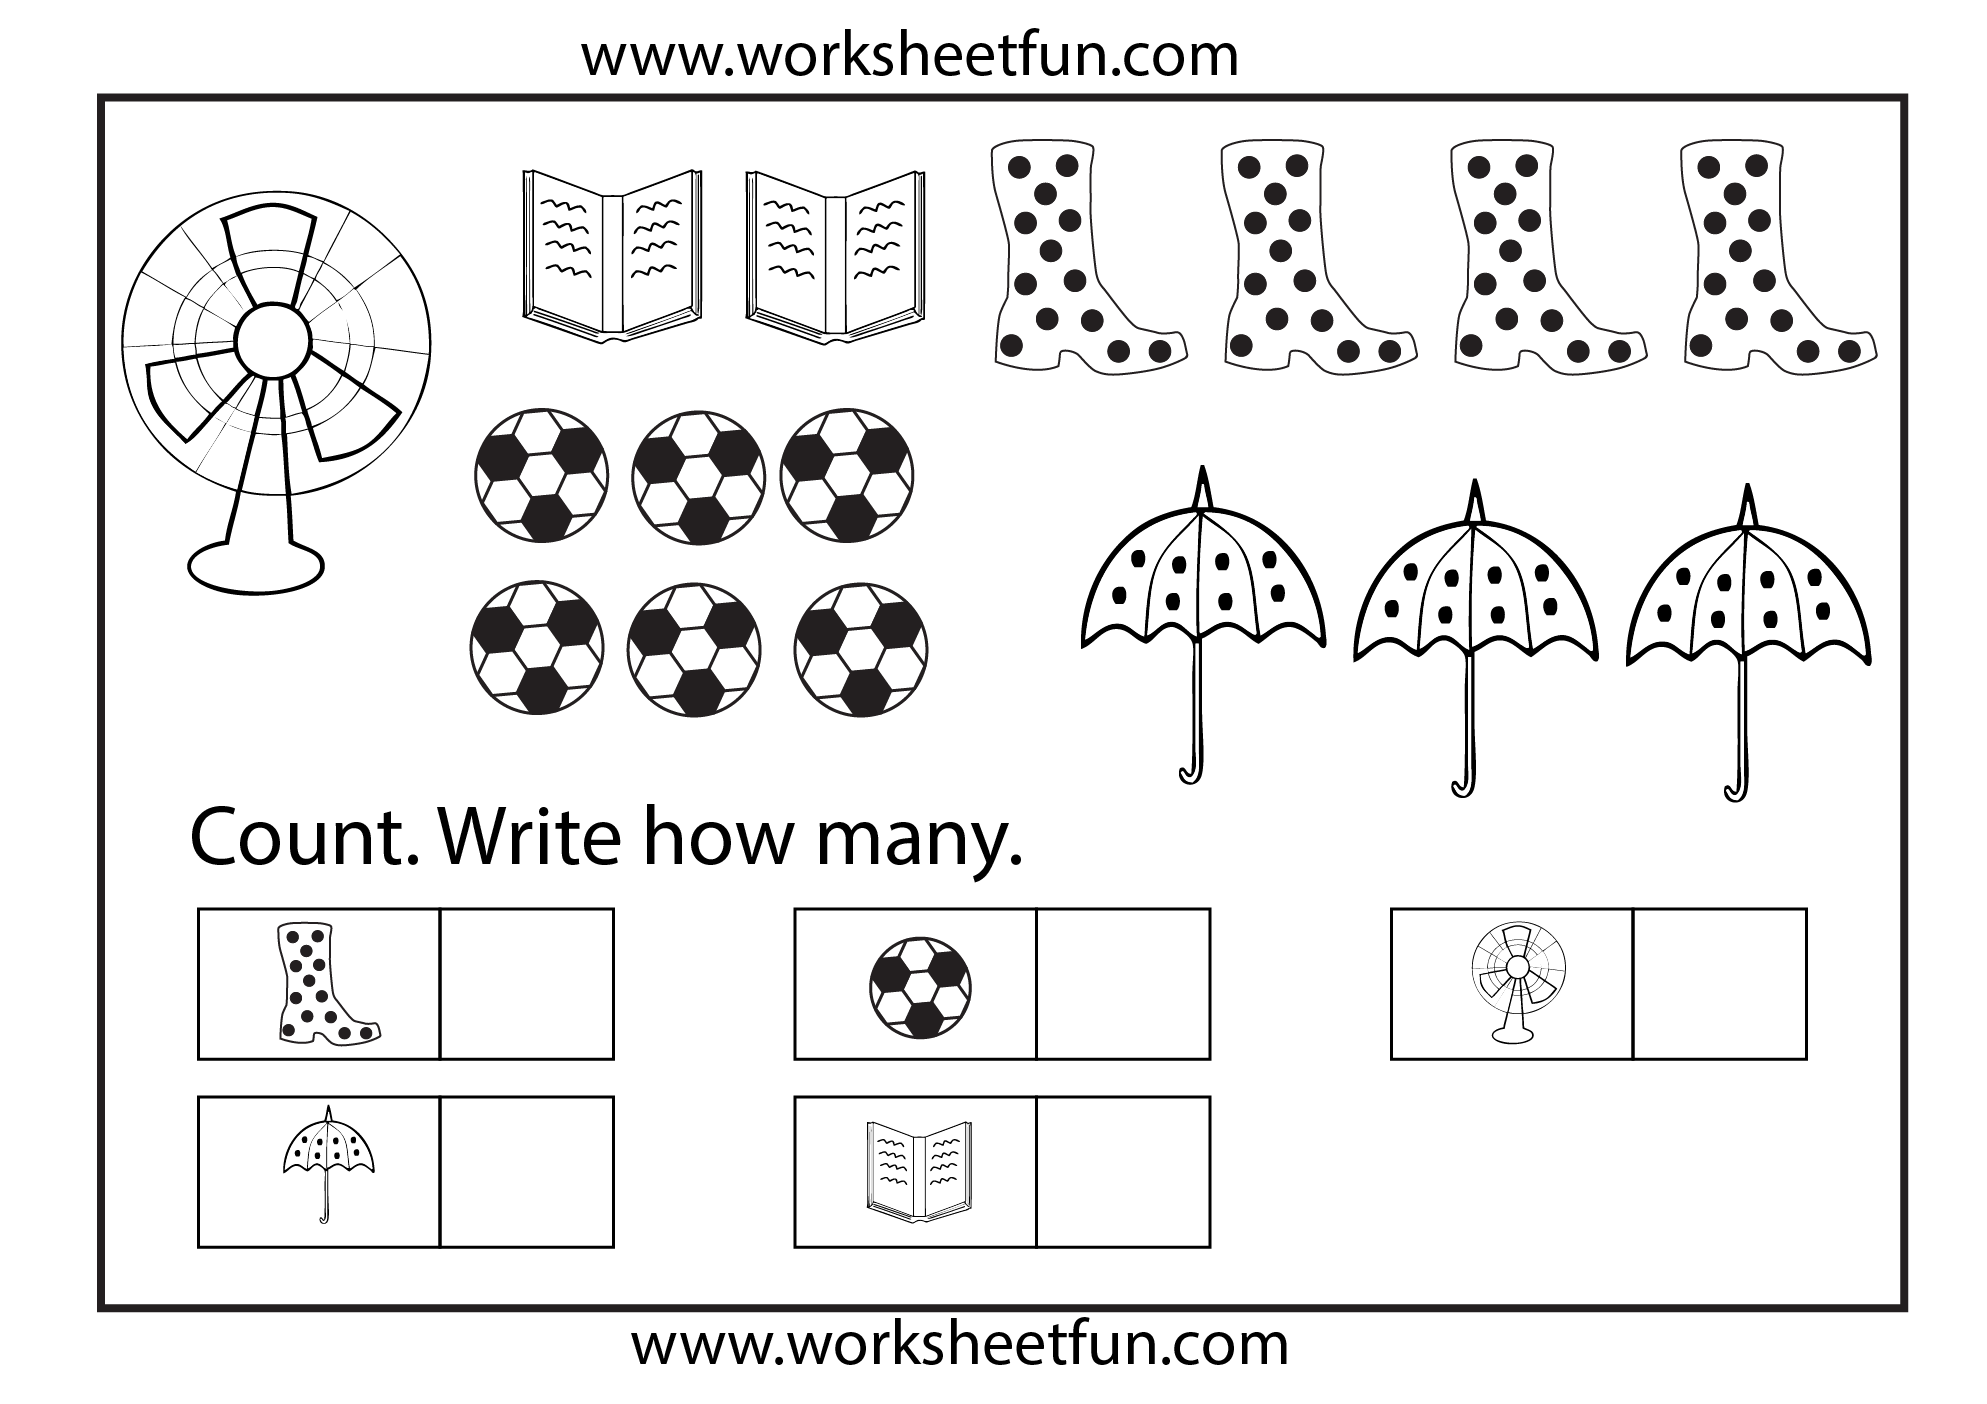 4-best-images-of-printable-worksheets-counting-to-100-counting-numbers-1-10-worksheets